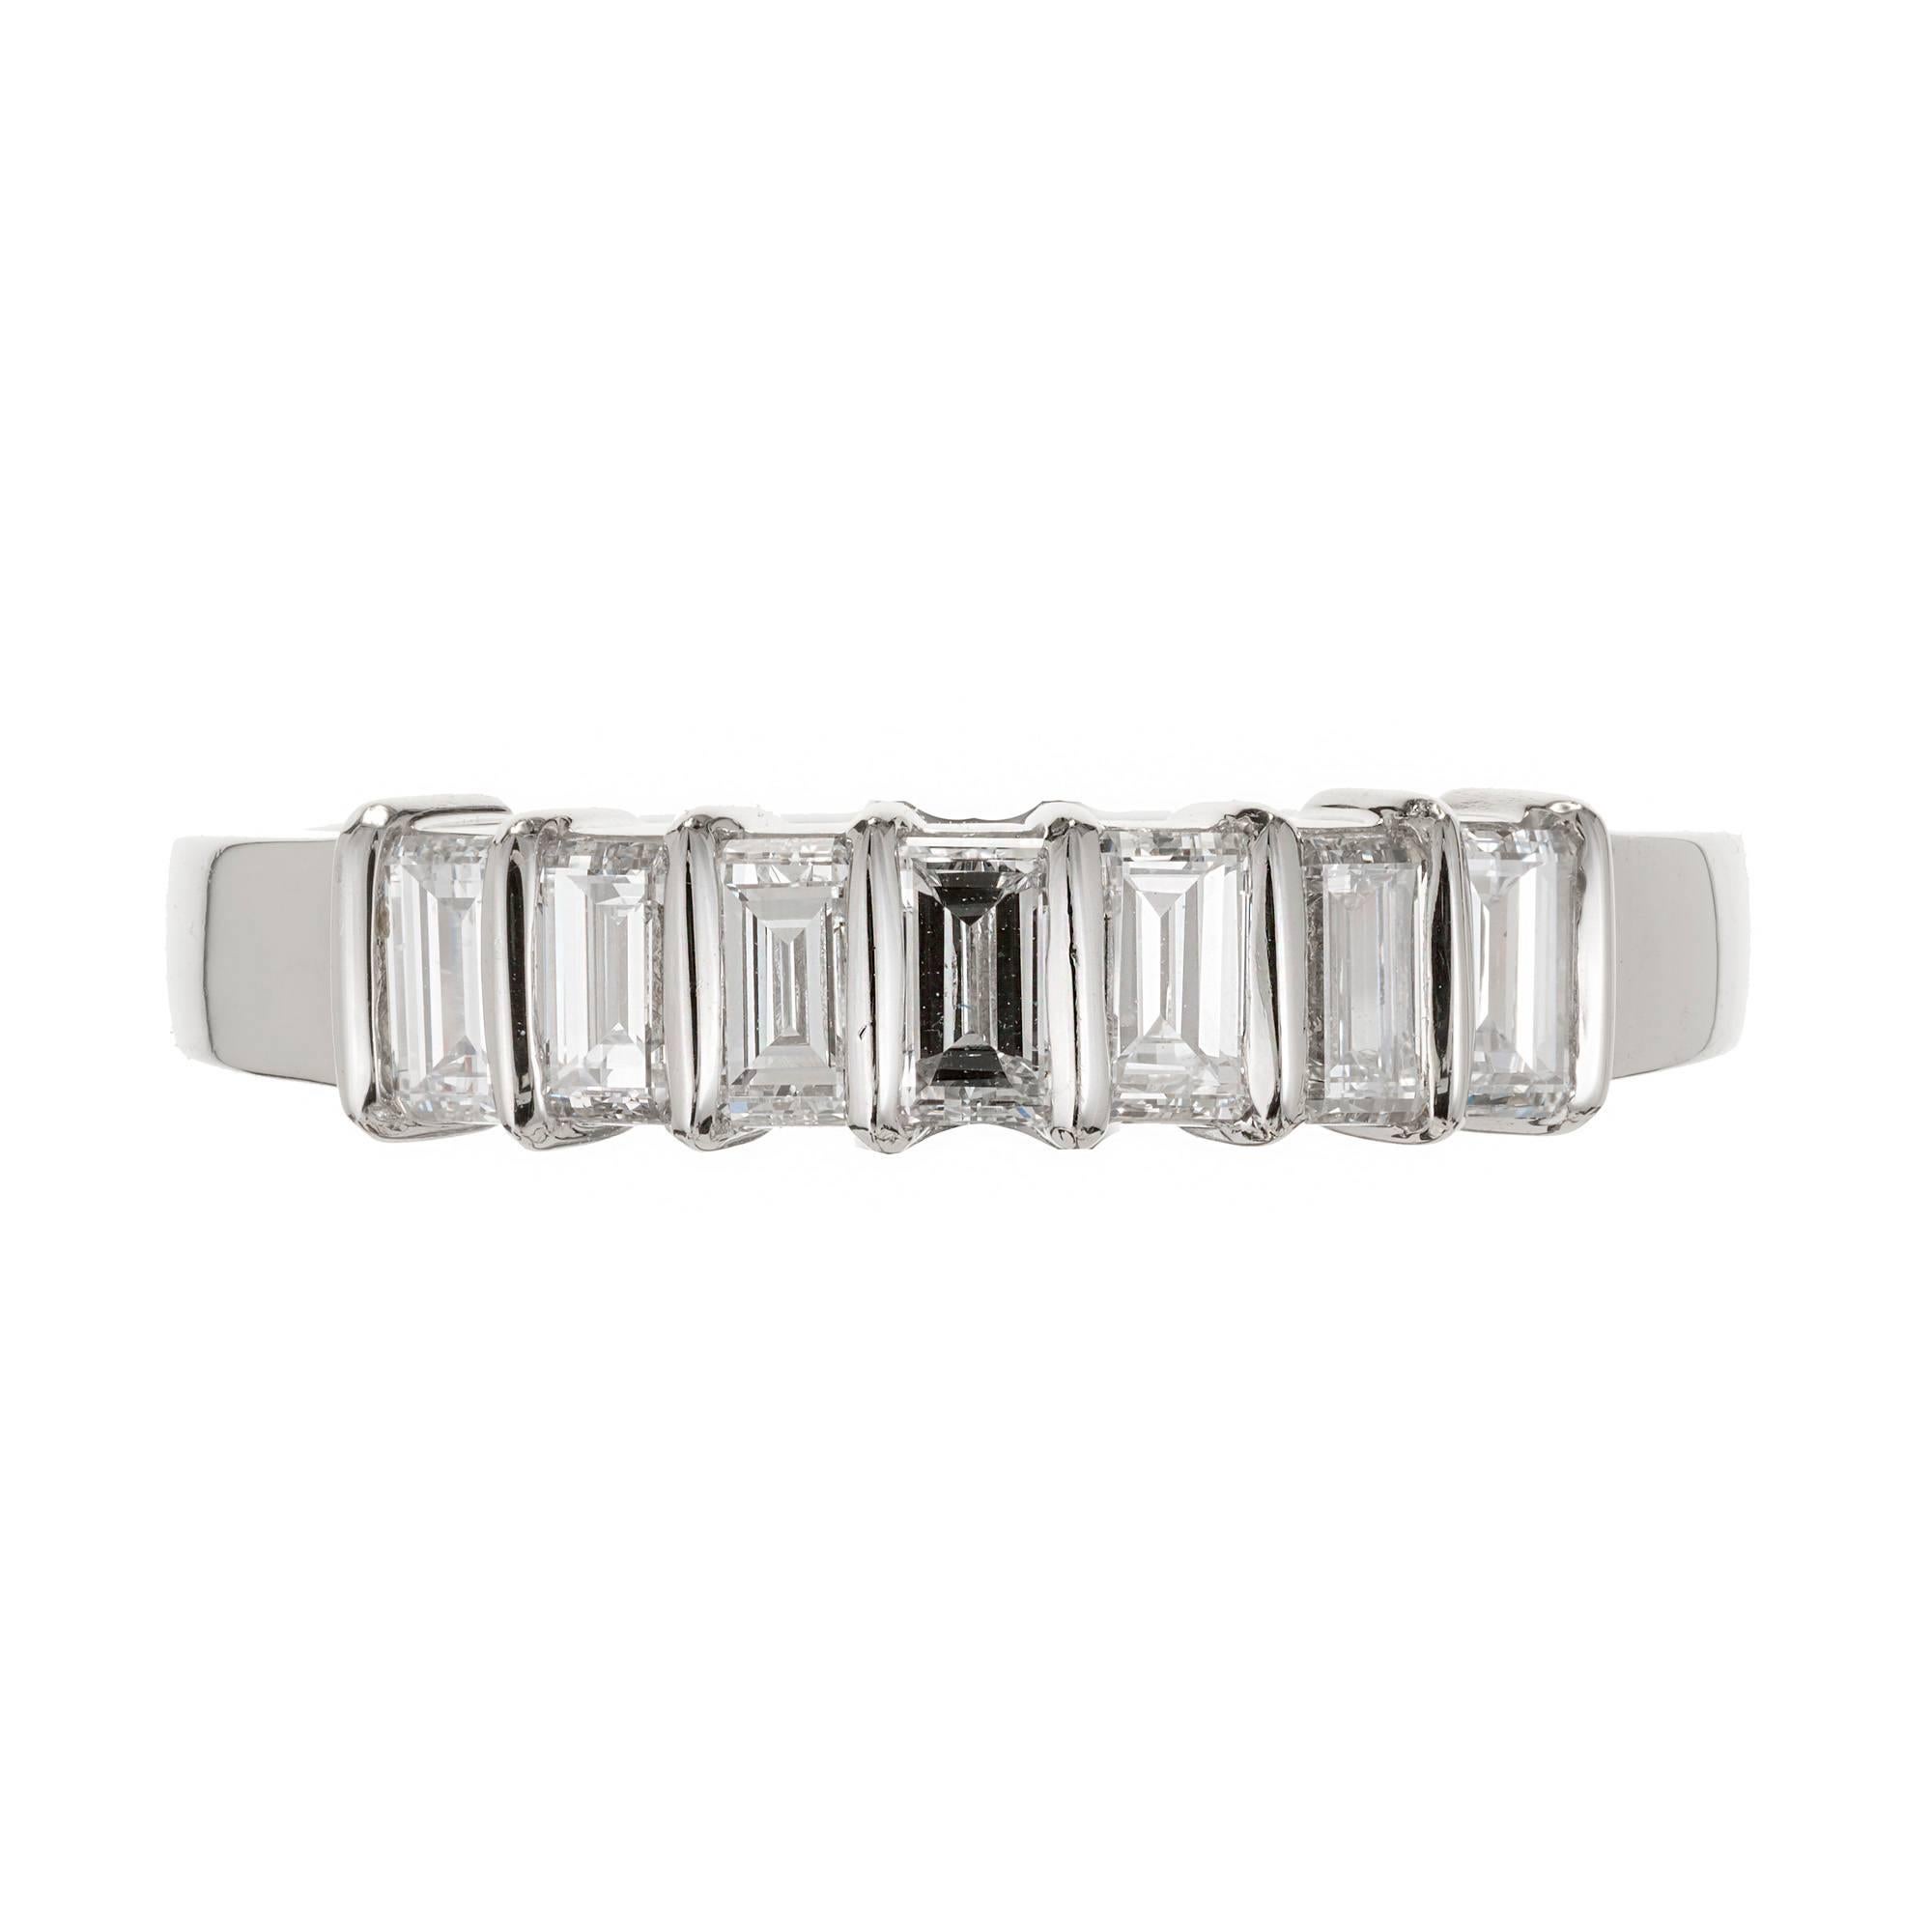 Tiffany & Co Emerald Cut Diamond wedding band with 7 Diamonds bar set in Platinum. 

7 Emerald cut Diamonds, approx. total weight .75cts, F – G, VS
Platinum
Tested: Platinum
Stamped: Plat
Hallmark: Tiffany
Width at top: 4.22mm
Height at top: